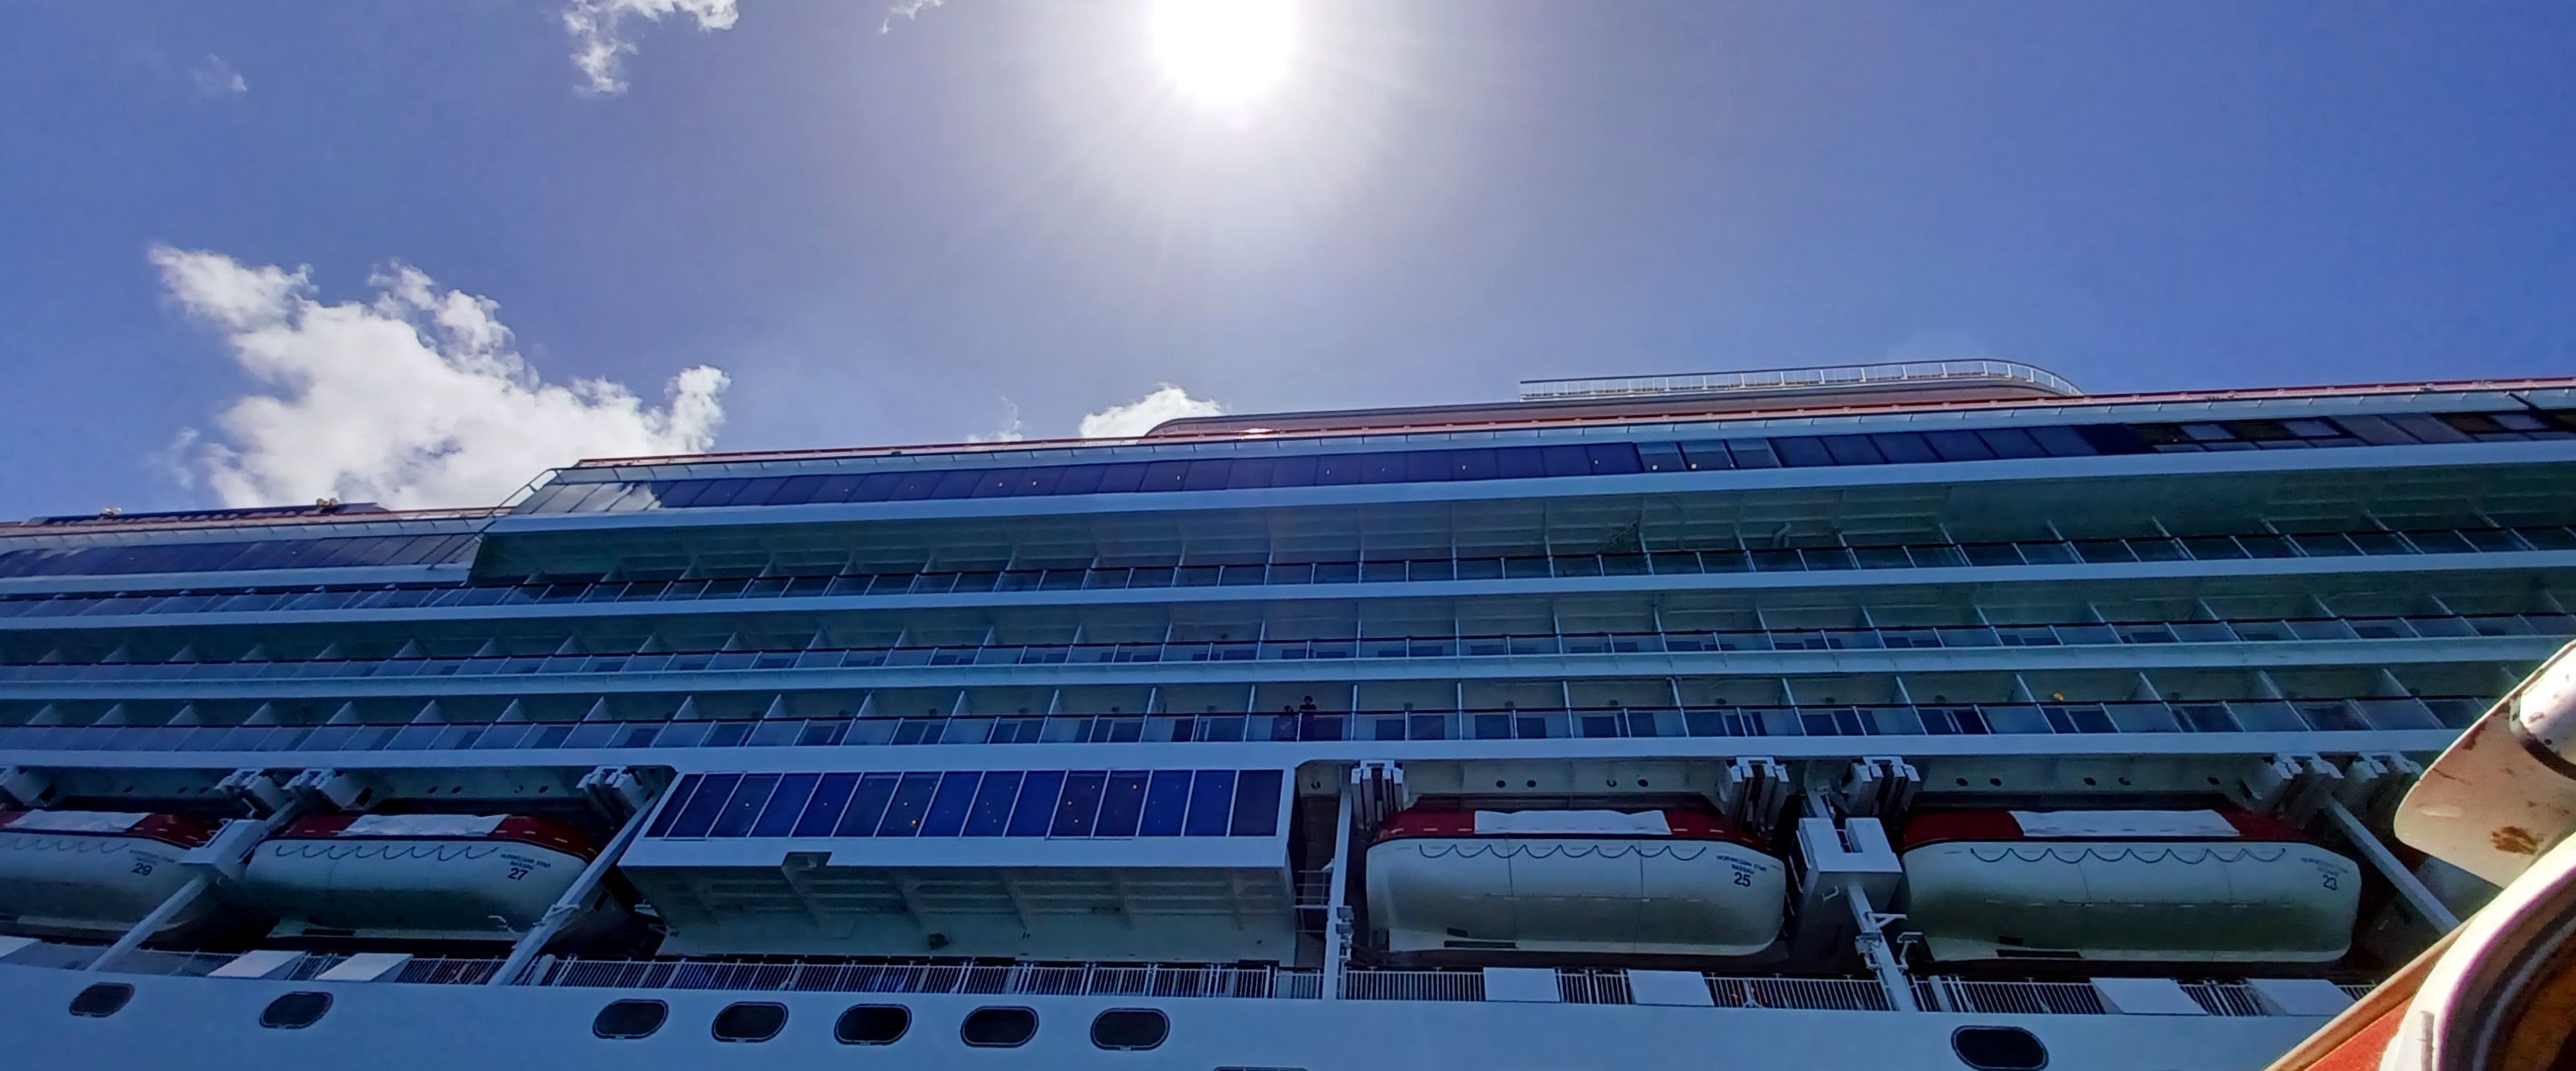 next to cruise ship boat life